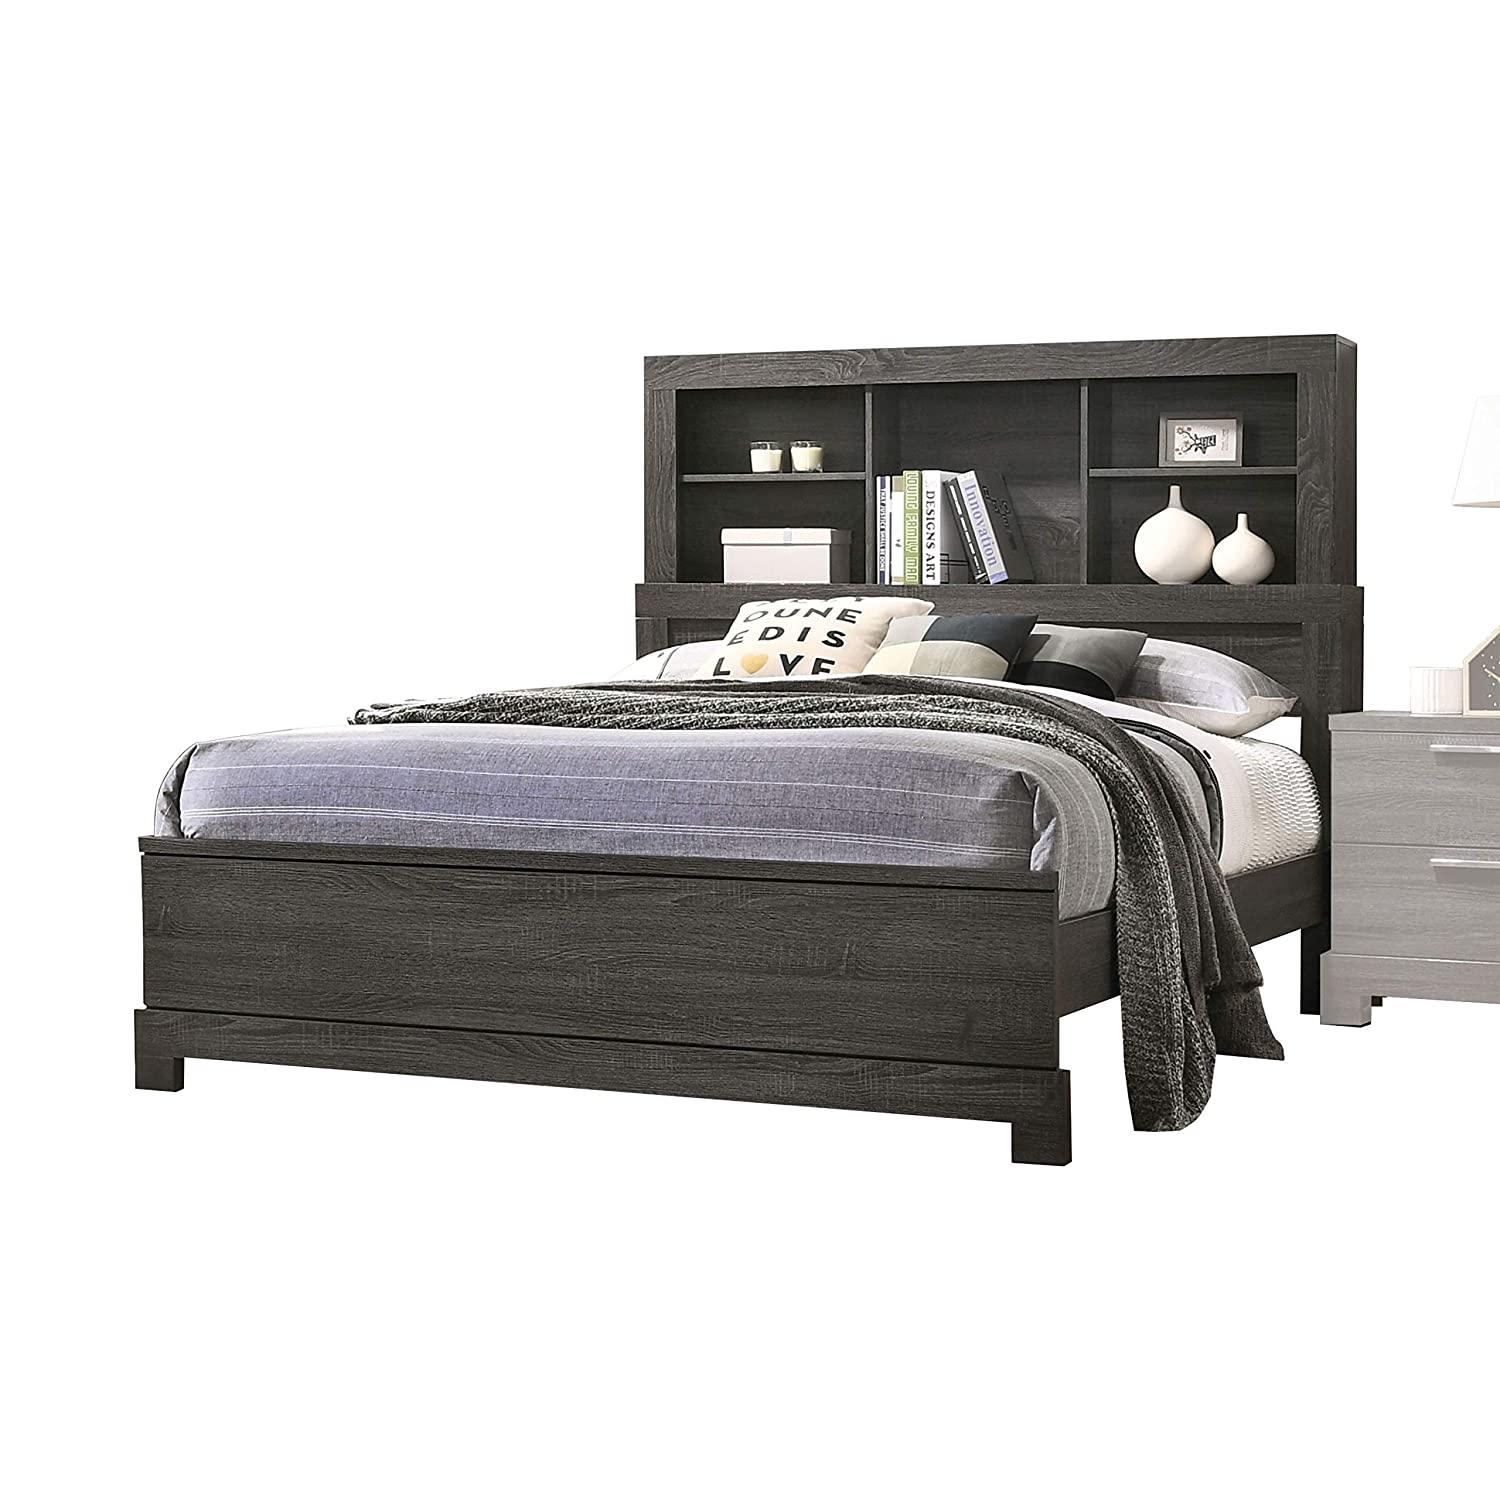 Transitional Storage Bed Lantha-22030Q 22030Q in Gray Matte Lacquer